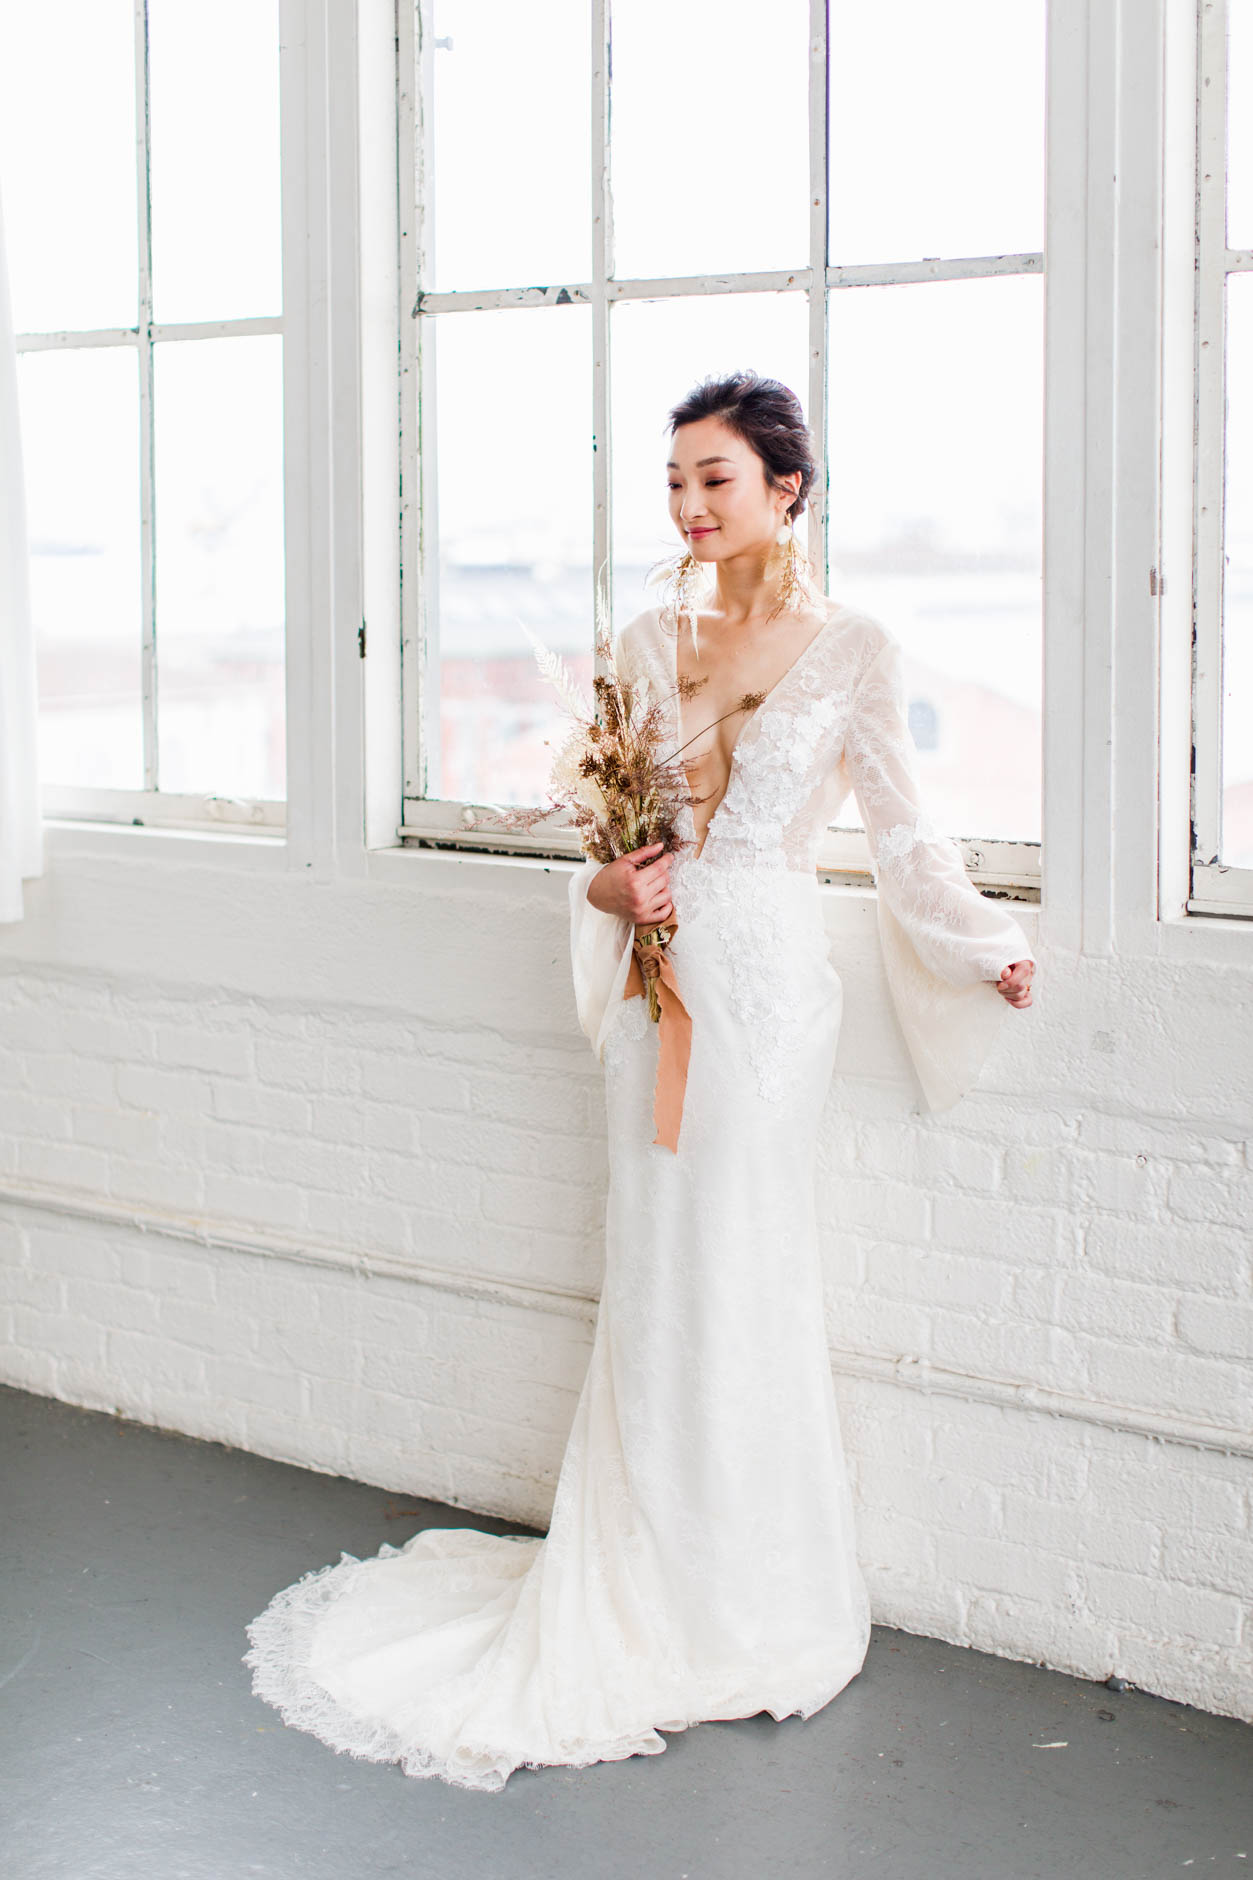 Bride with dried floral bouquet and lace bell sleeves standing in front of windows in modern warehouse wedding inspiration